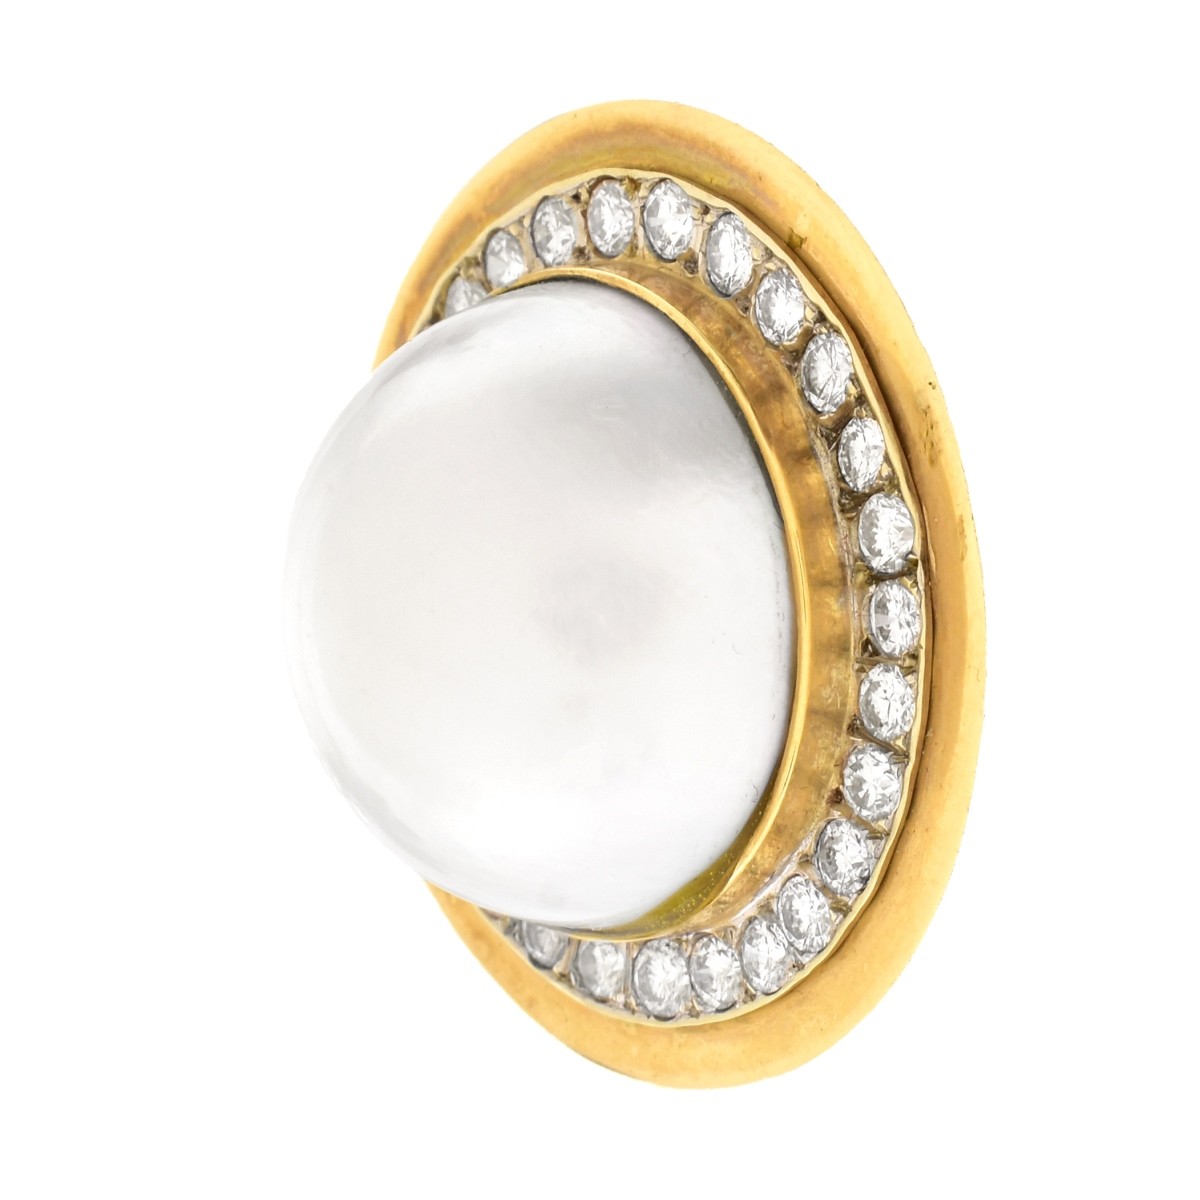 Mabe Pearl, 3.0ct. Diamond and 14K Gold Clip